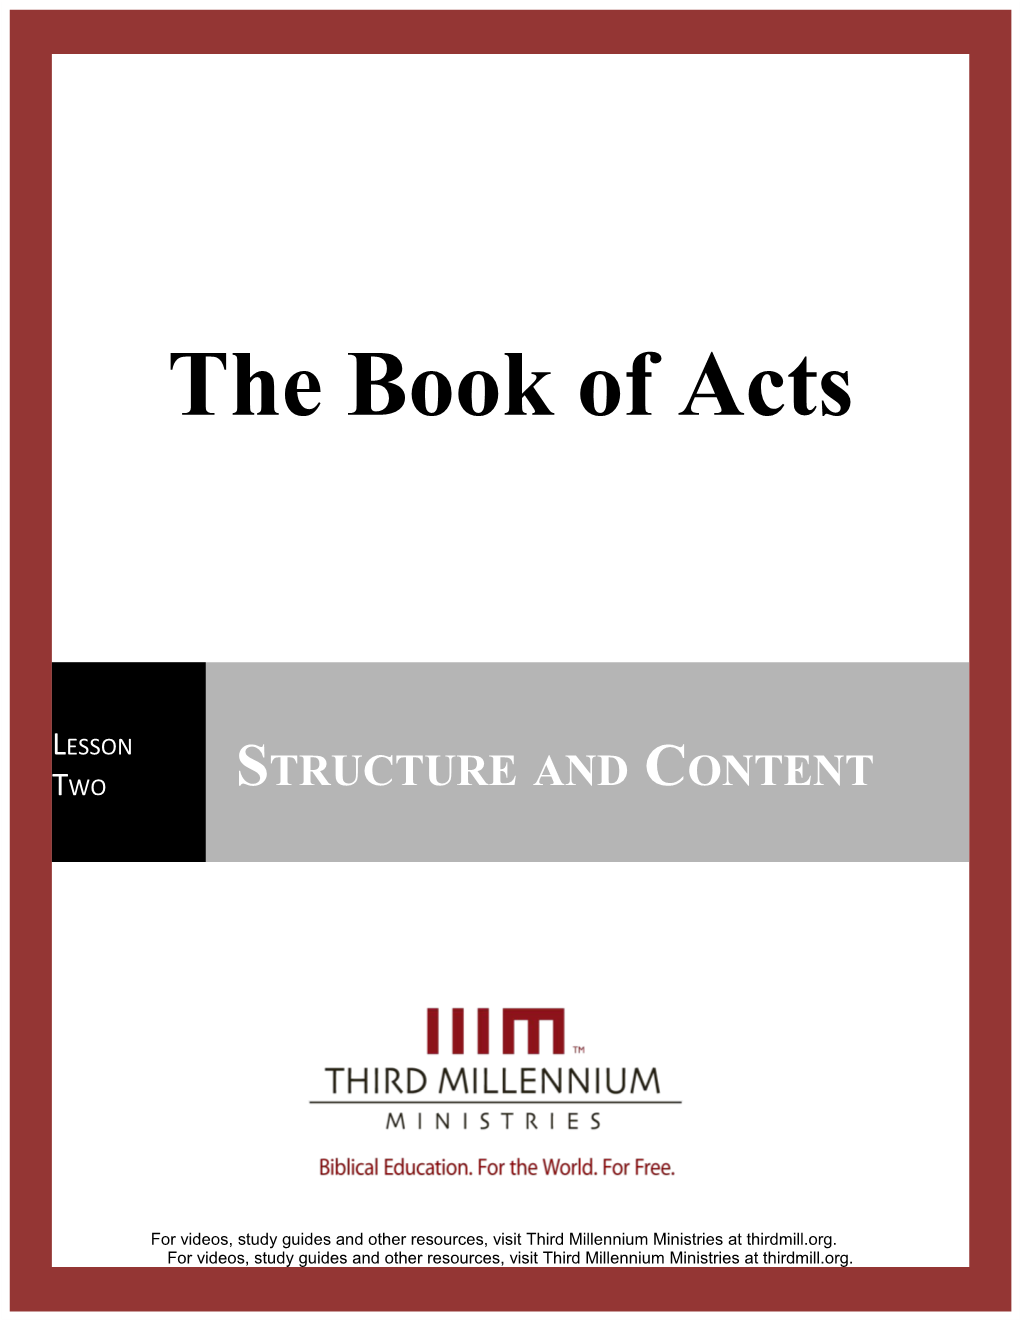 The Book of Acts, Lesson 2